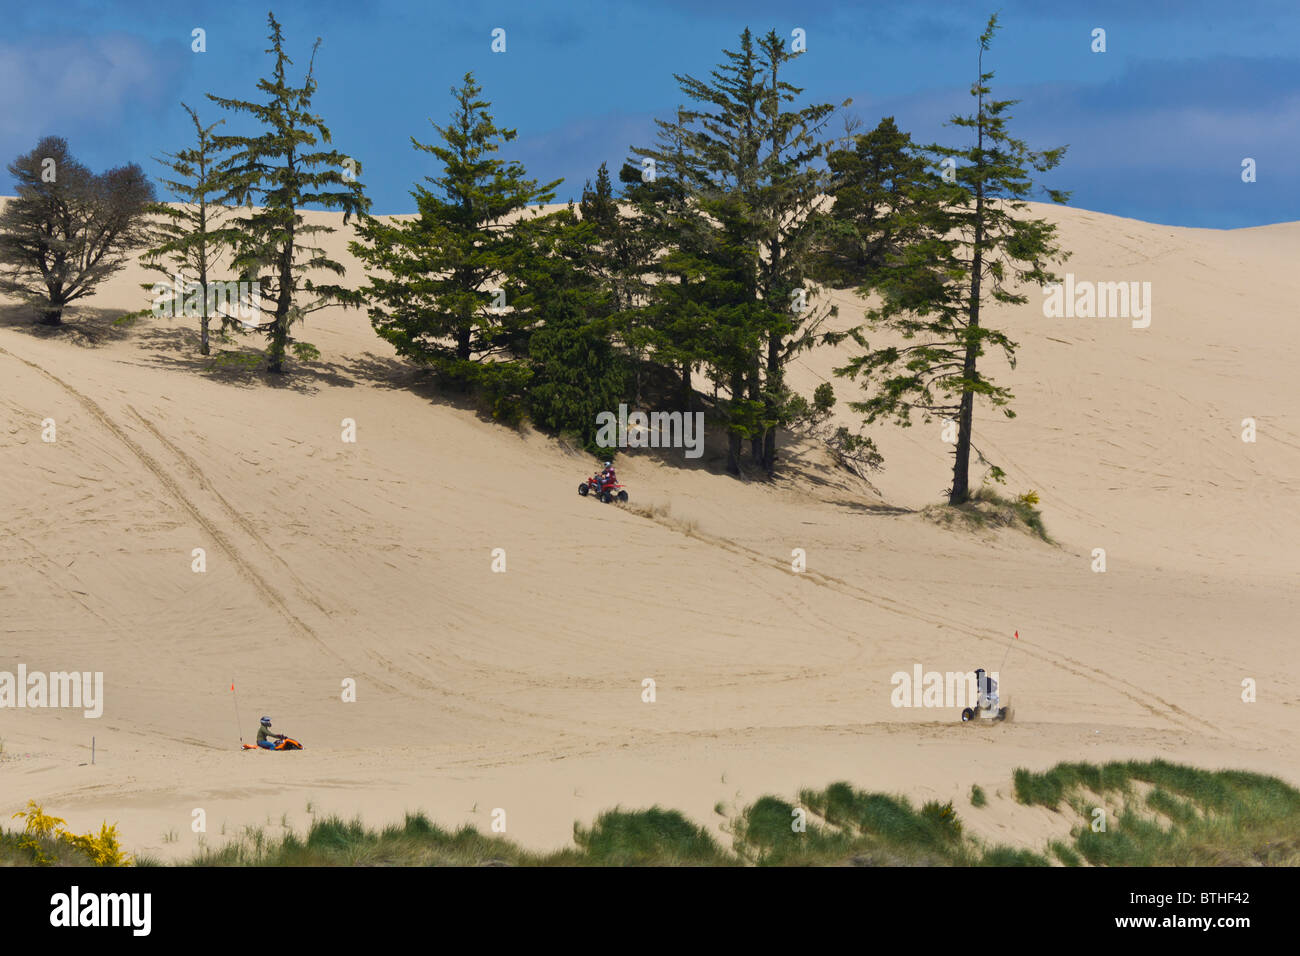 ATVs in Oregon Dunes National recreation Area north of Coos Bay Oregon Stock Photo